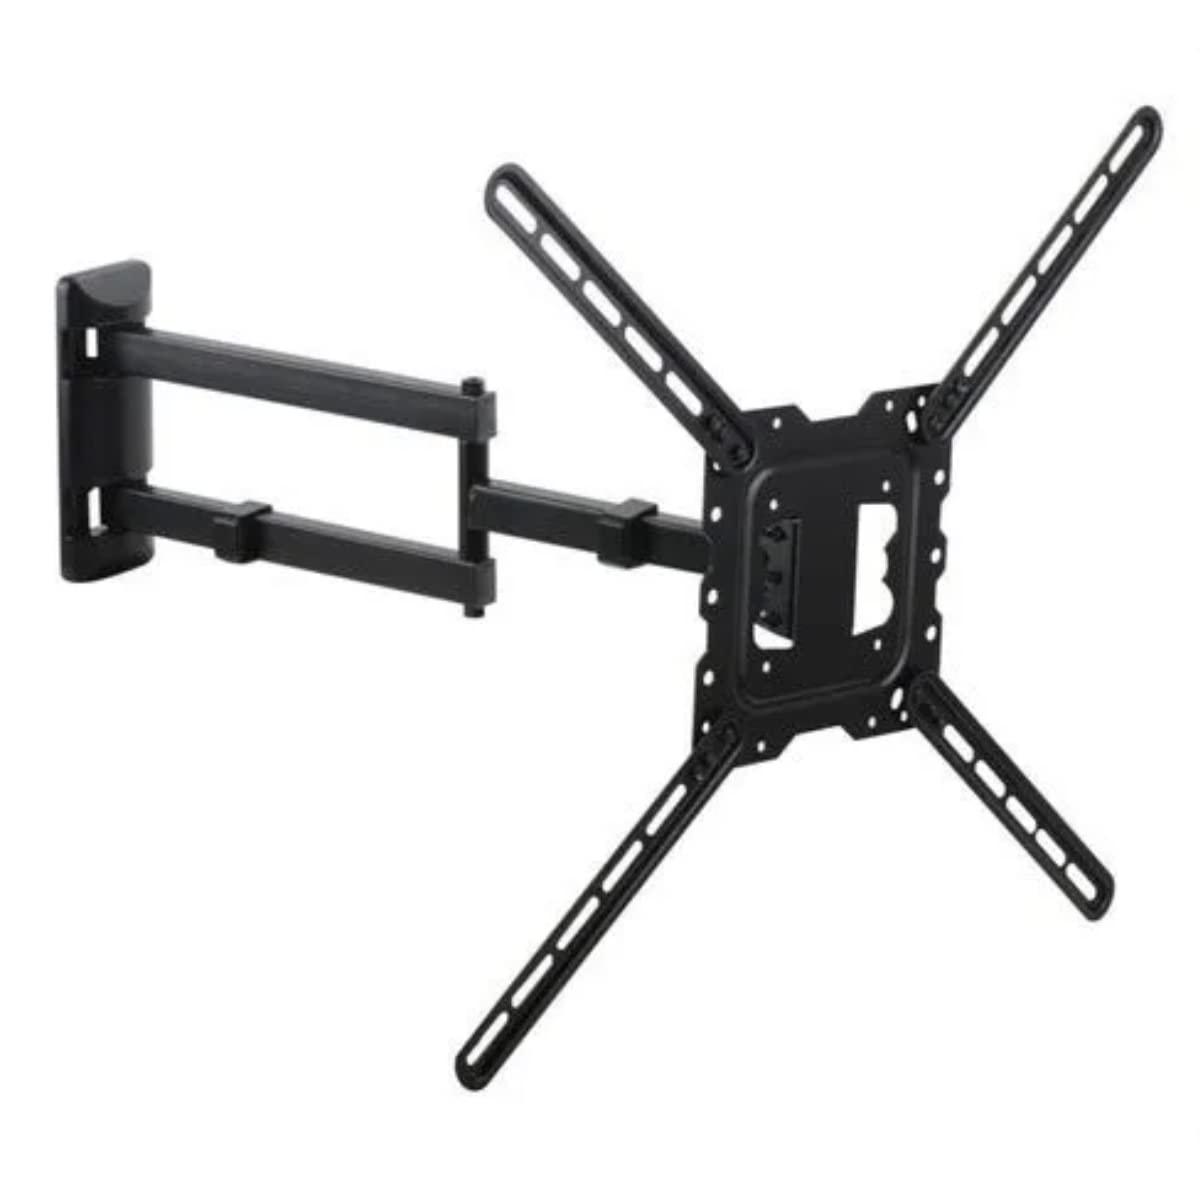 49 - 75 Inch 2 feet extendable Wall Mount for LED TV Flat Panel & Curved screens